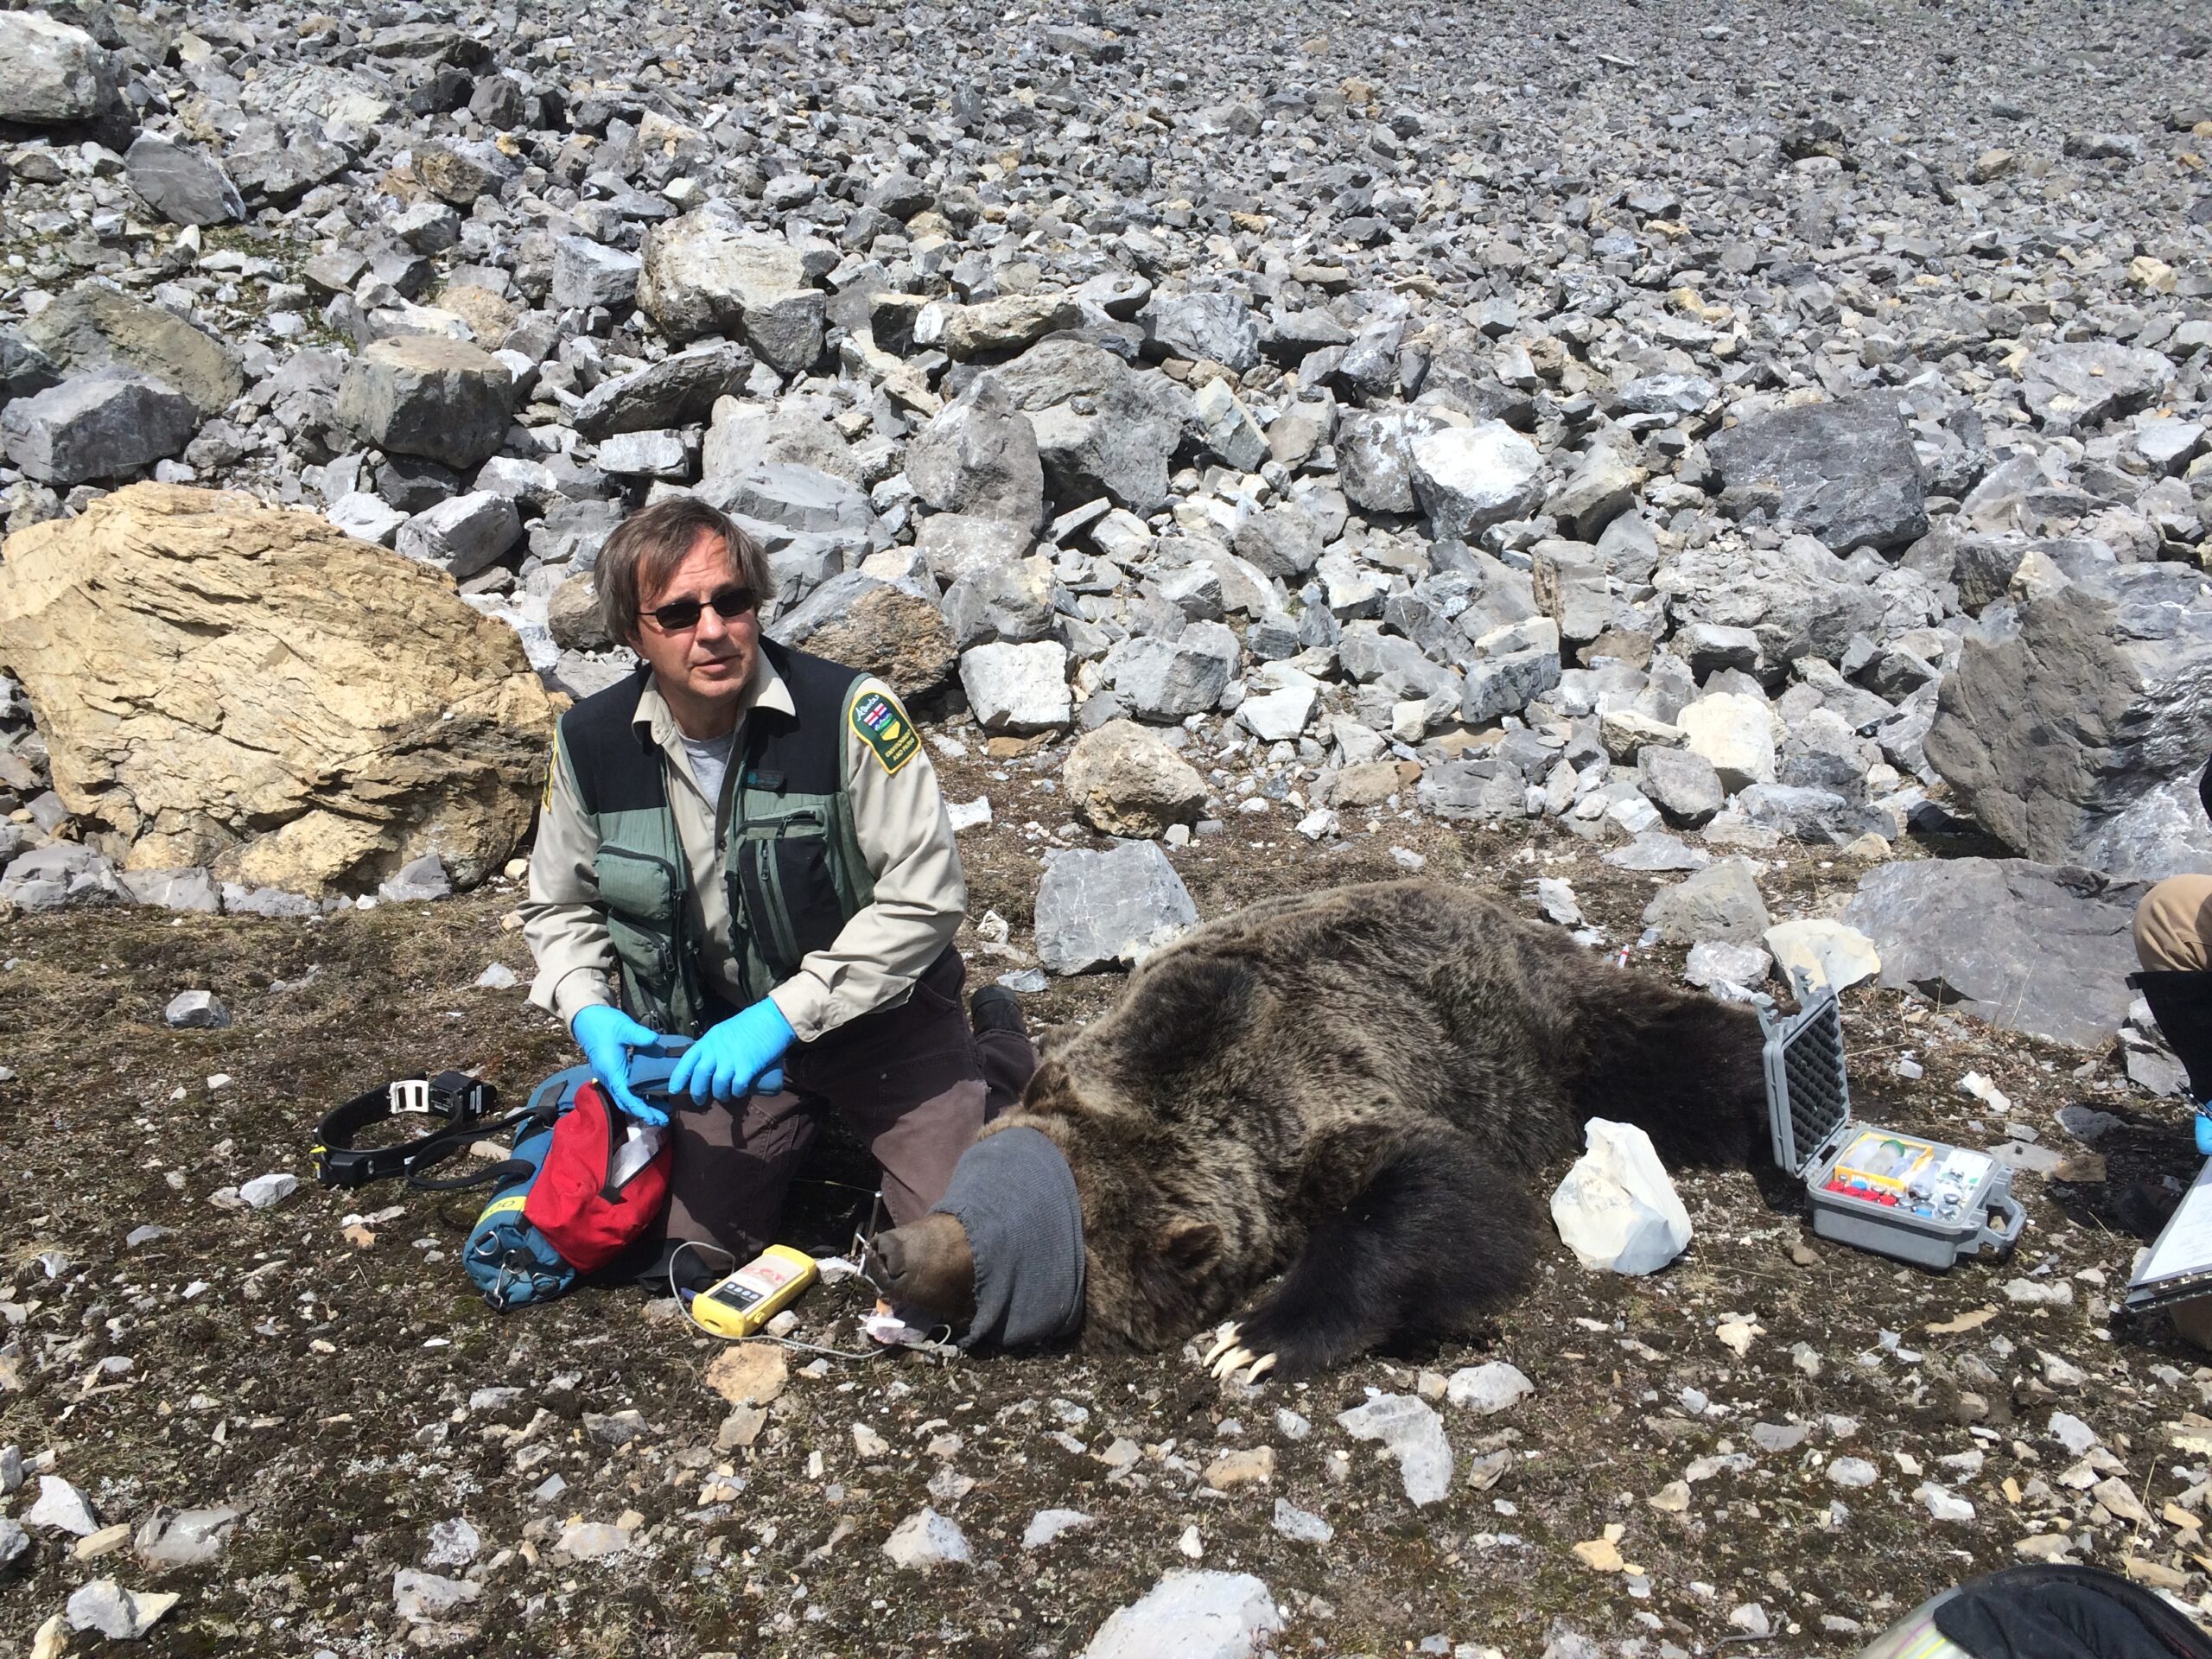 Gordon Stenhouse works to collar a grizzly bear while under a tranquilizer.